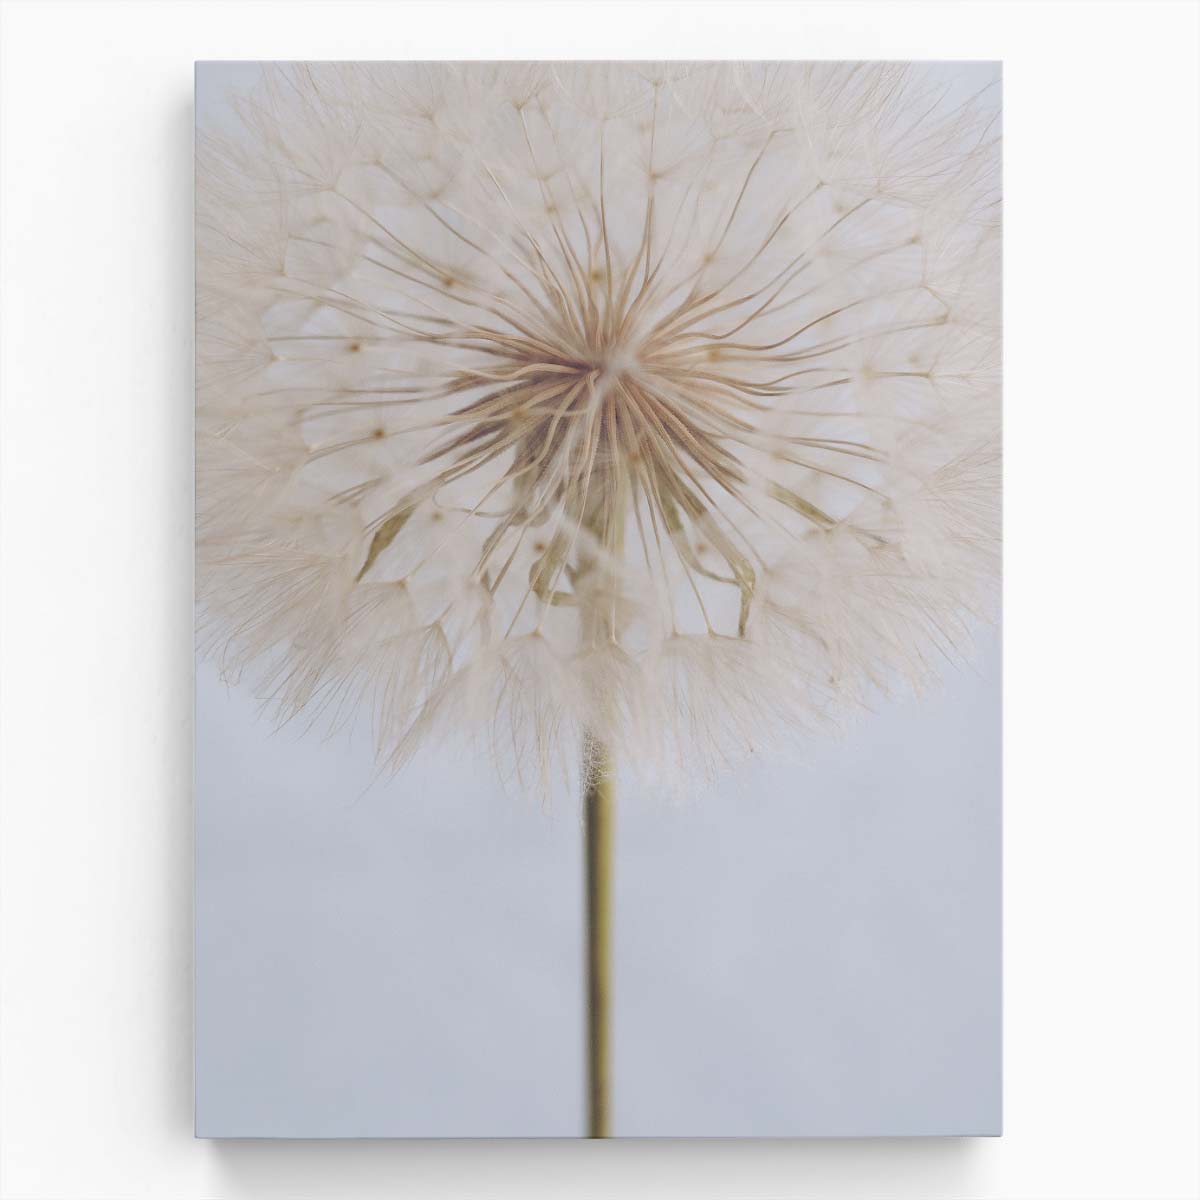 Delicate Dandelion Botanical Still Life Photography by uplusmestudio by Luxuriance Designs, made in USA